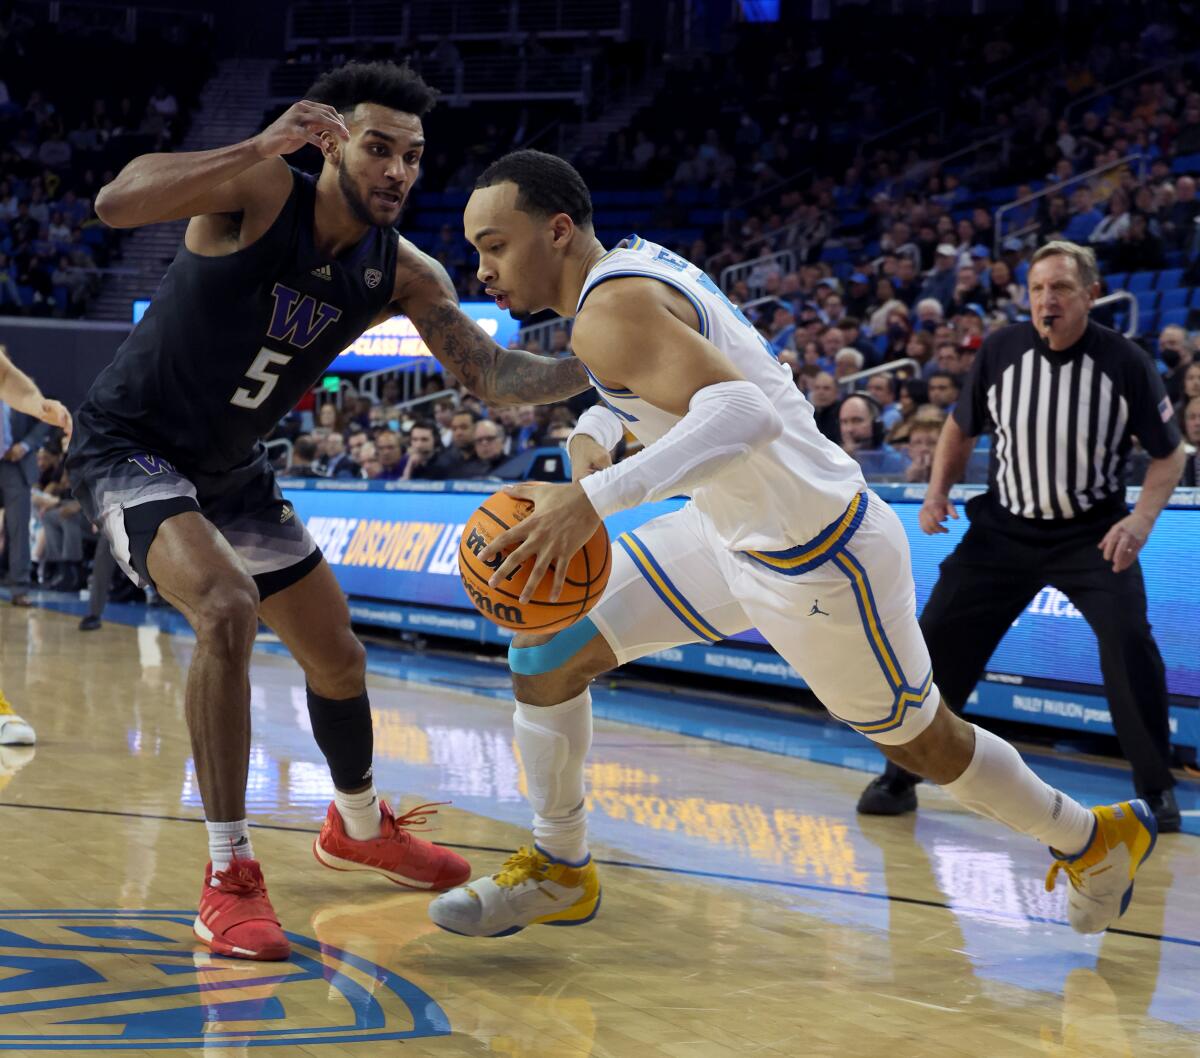 UCLA guard Amari Bailey, right, drives to the basket against Washington guard Jamal Bey in the second half.